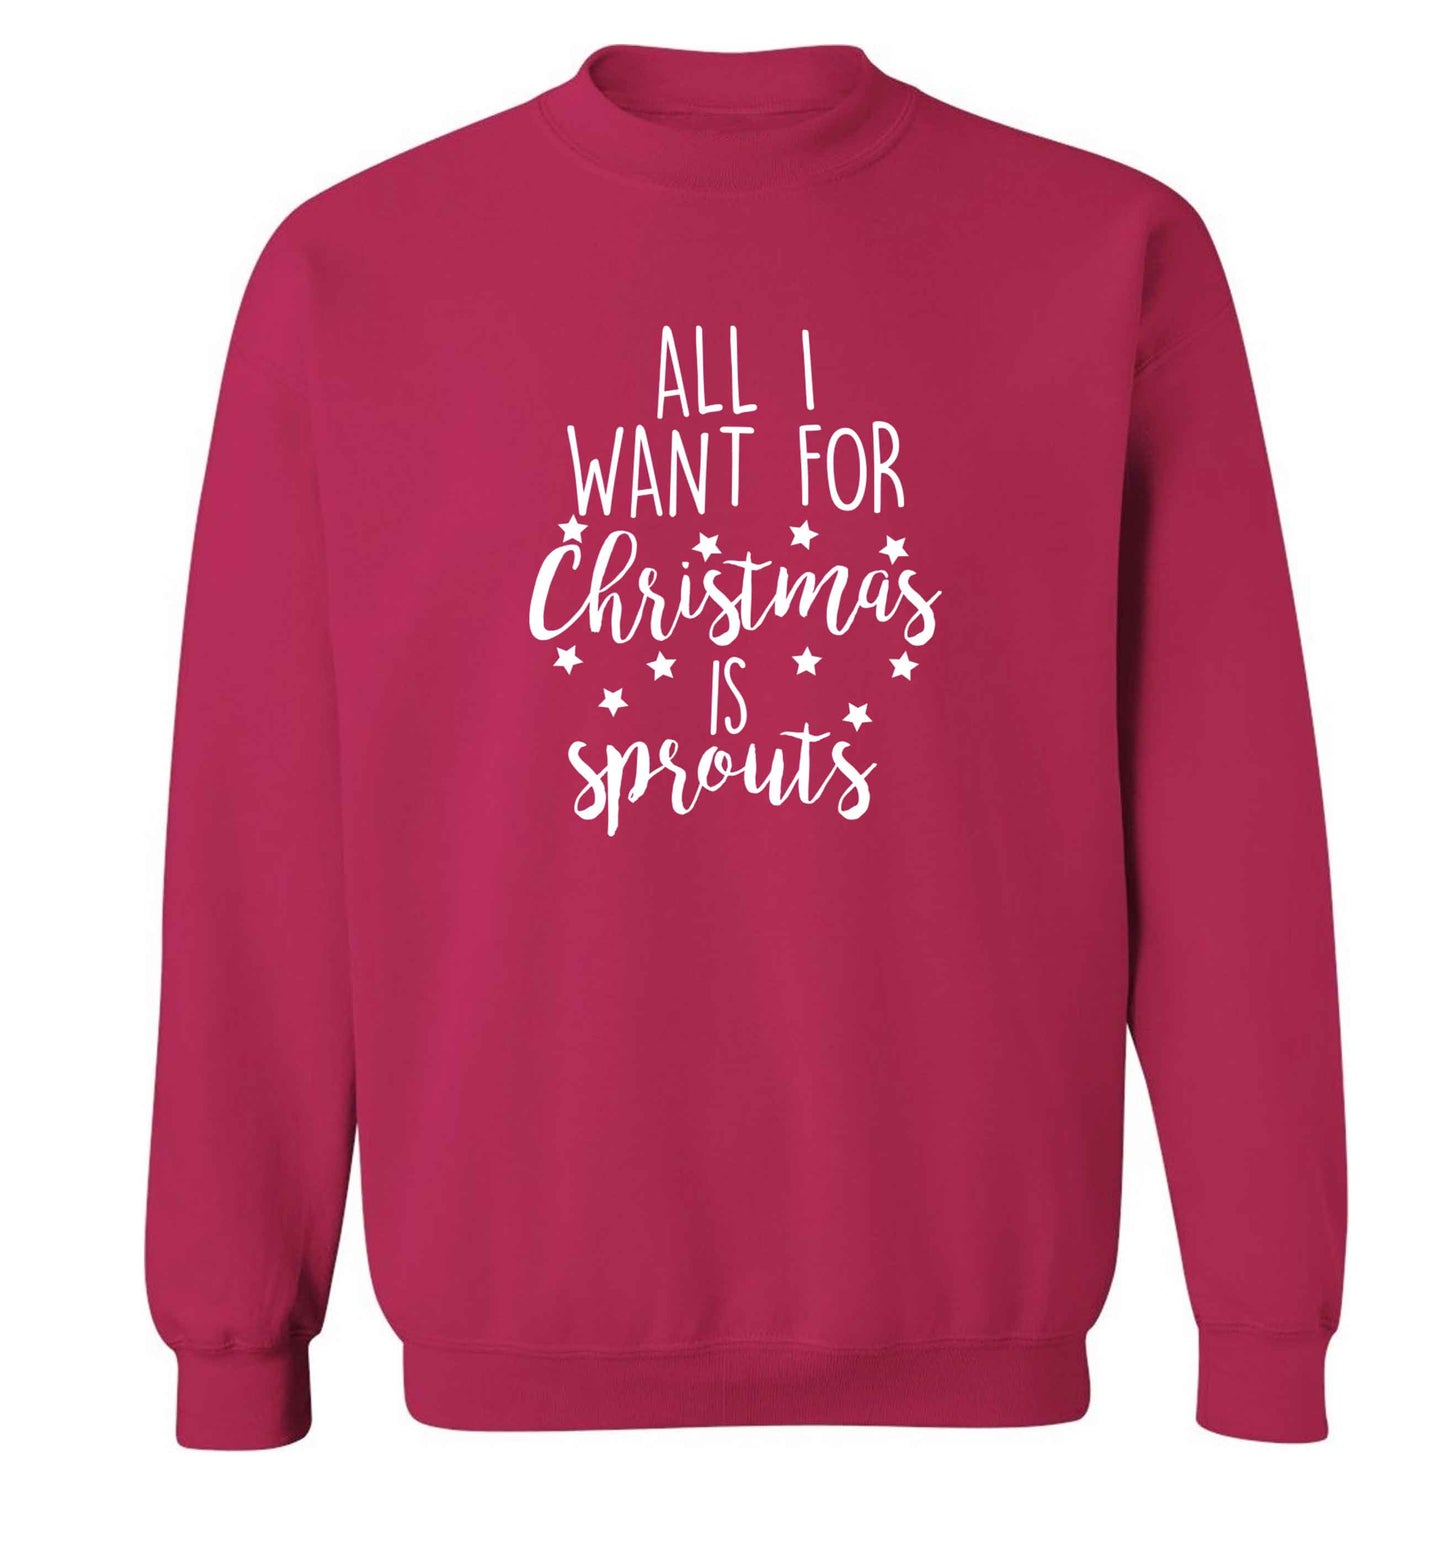 All I want for Christmas is sprouts adult's unisex pink sweater 2XL